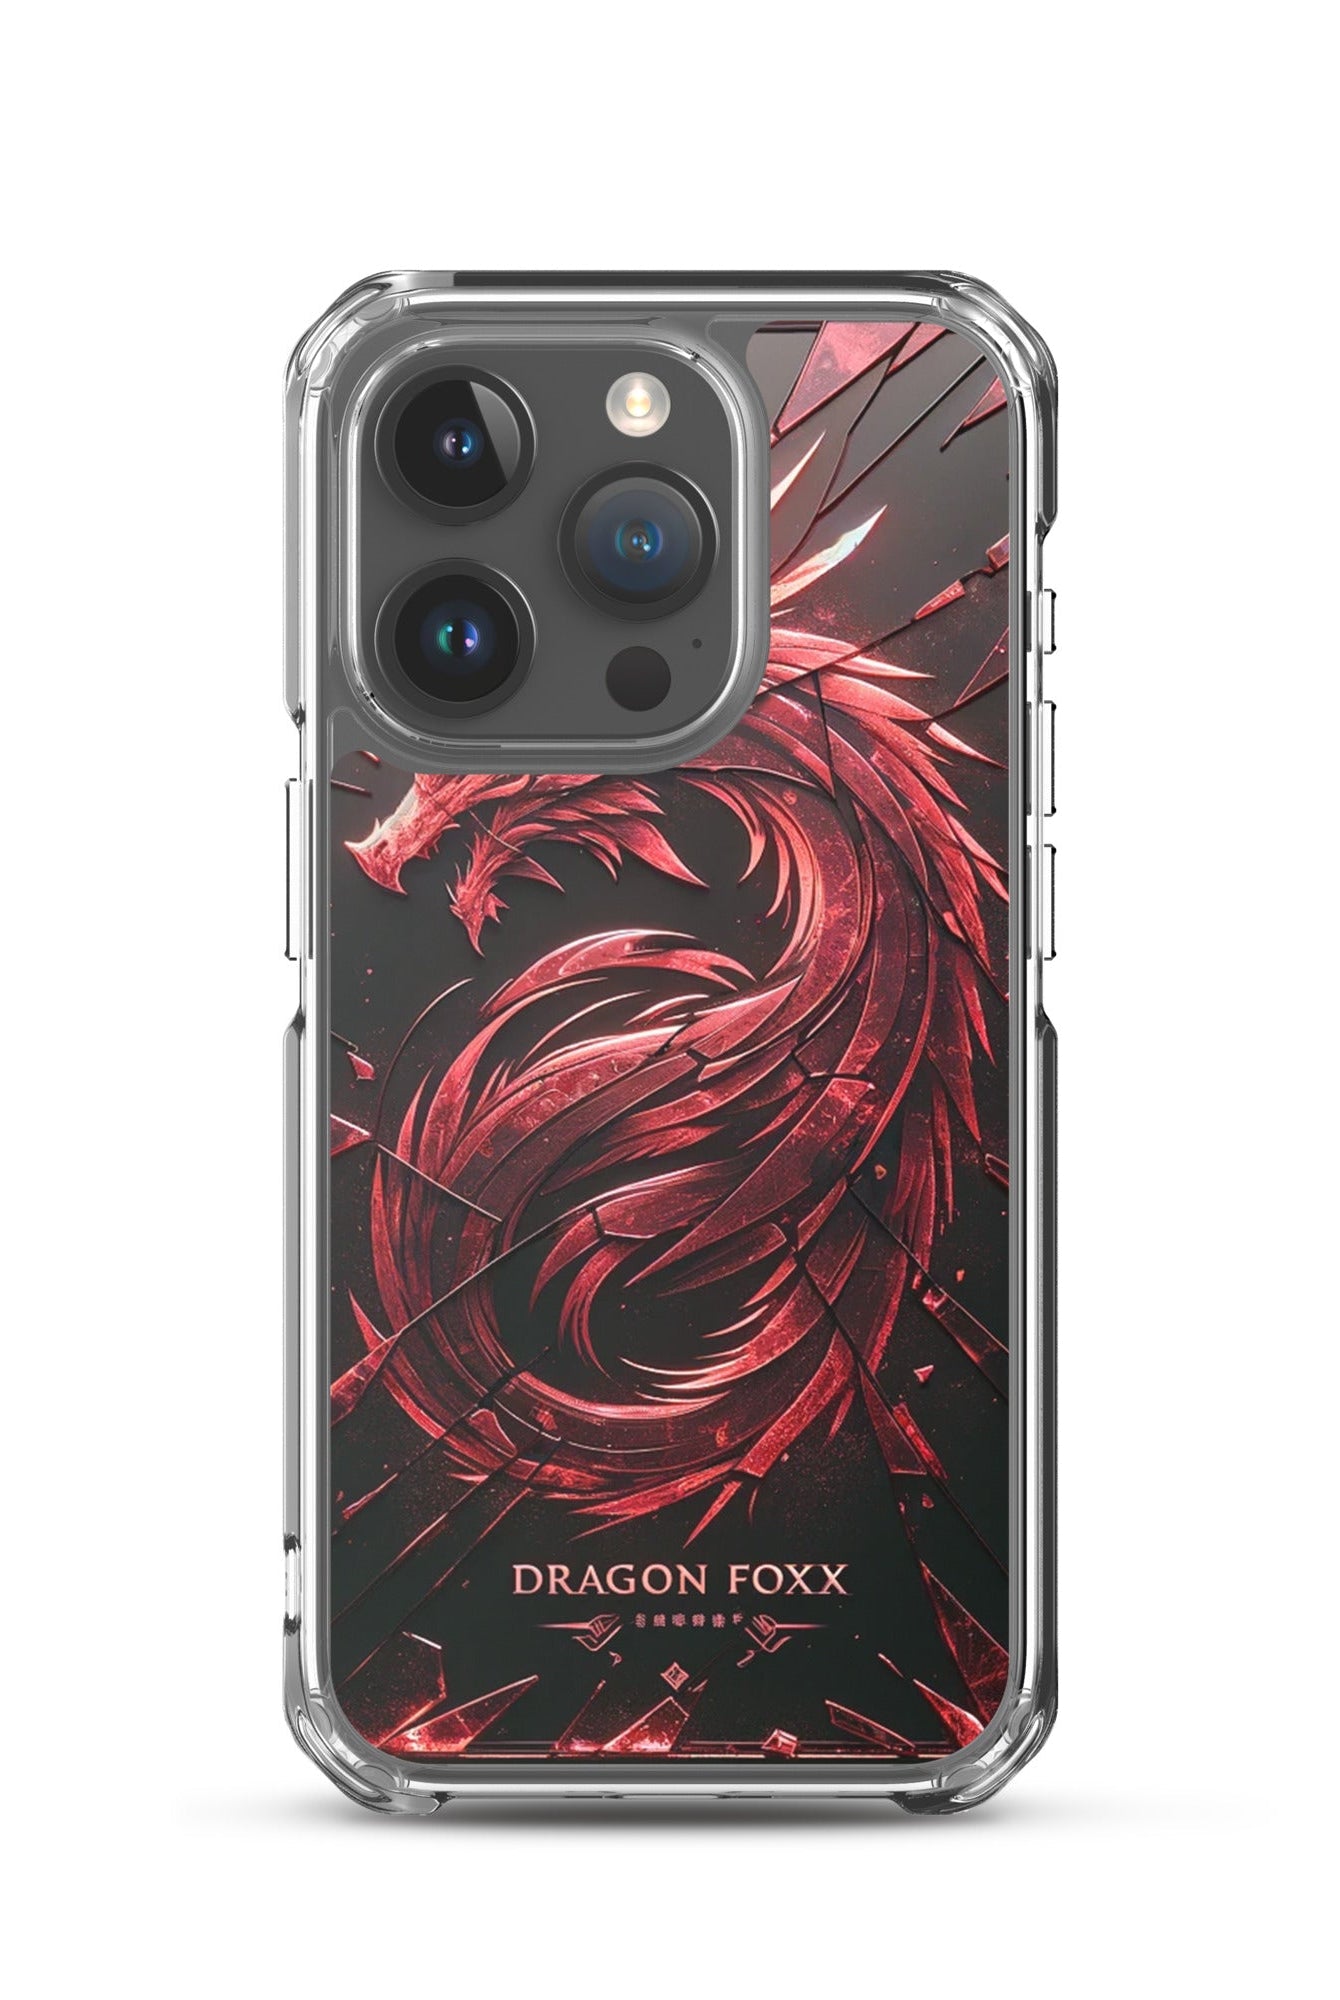 DRAGON FOXX™ Red Dragon Phone Case for iPhone® - Phone Case for iPhone® - DRAGON FOXX™ - DRAGON FOXX™ Red Dragon Phone Case for iPhone® - 7805351_17618 - iPhone 15 Pro - Red/Black/Clear - Accessories - Dragon Foxx™ - DRAGON FOXX™ Phone Case for iPhone®